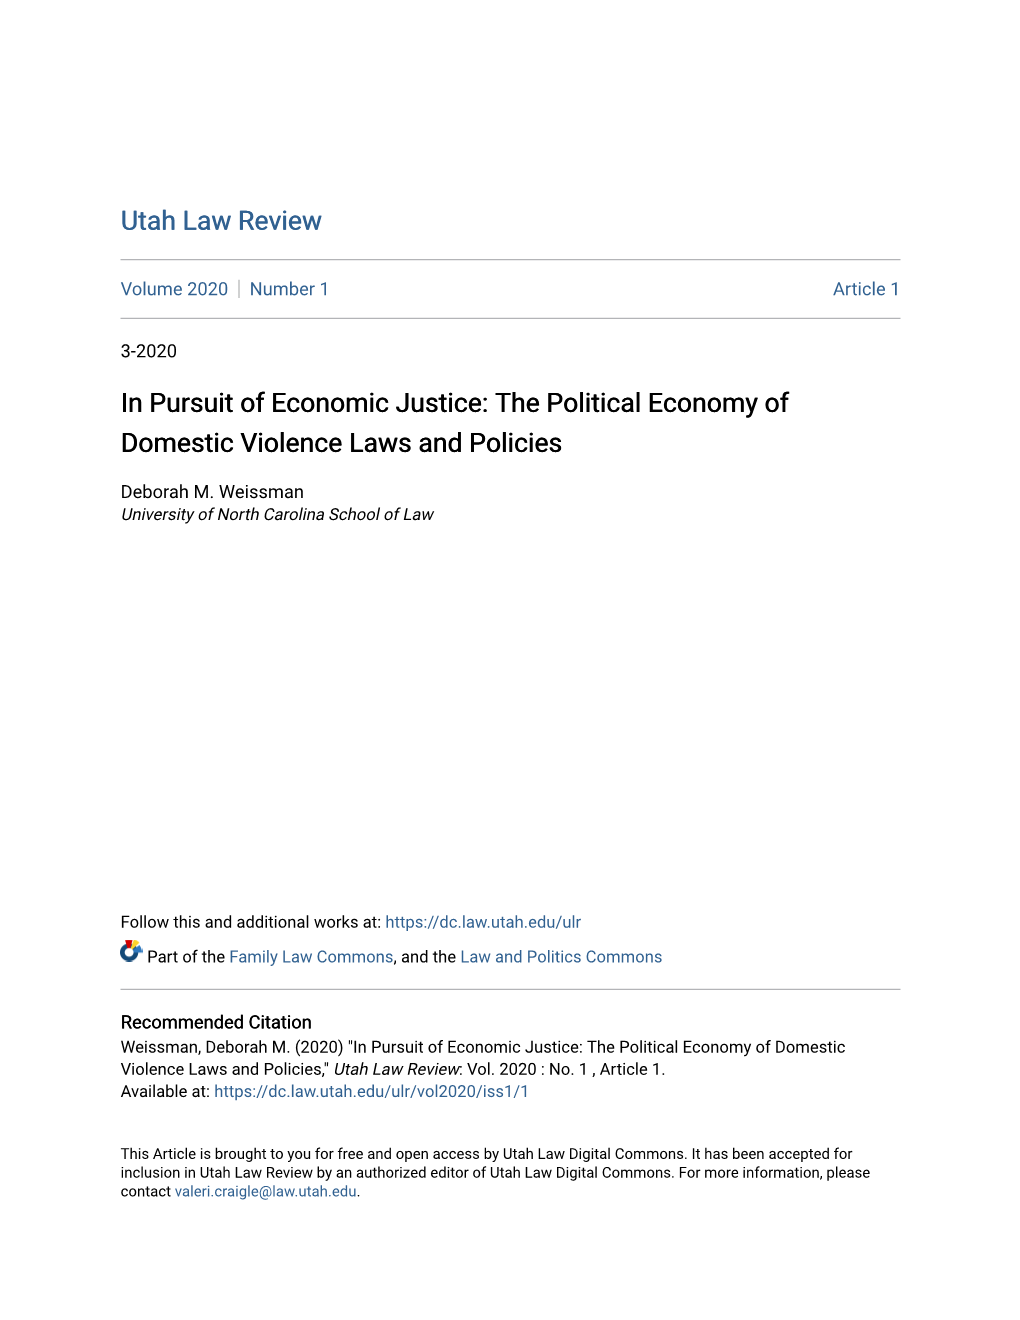 In Pursuit of Economic Justice: the Political Economy of Domestic Violence Laws and Policies